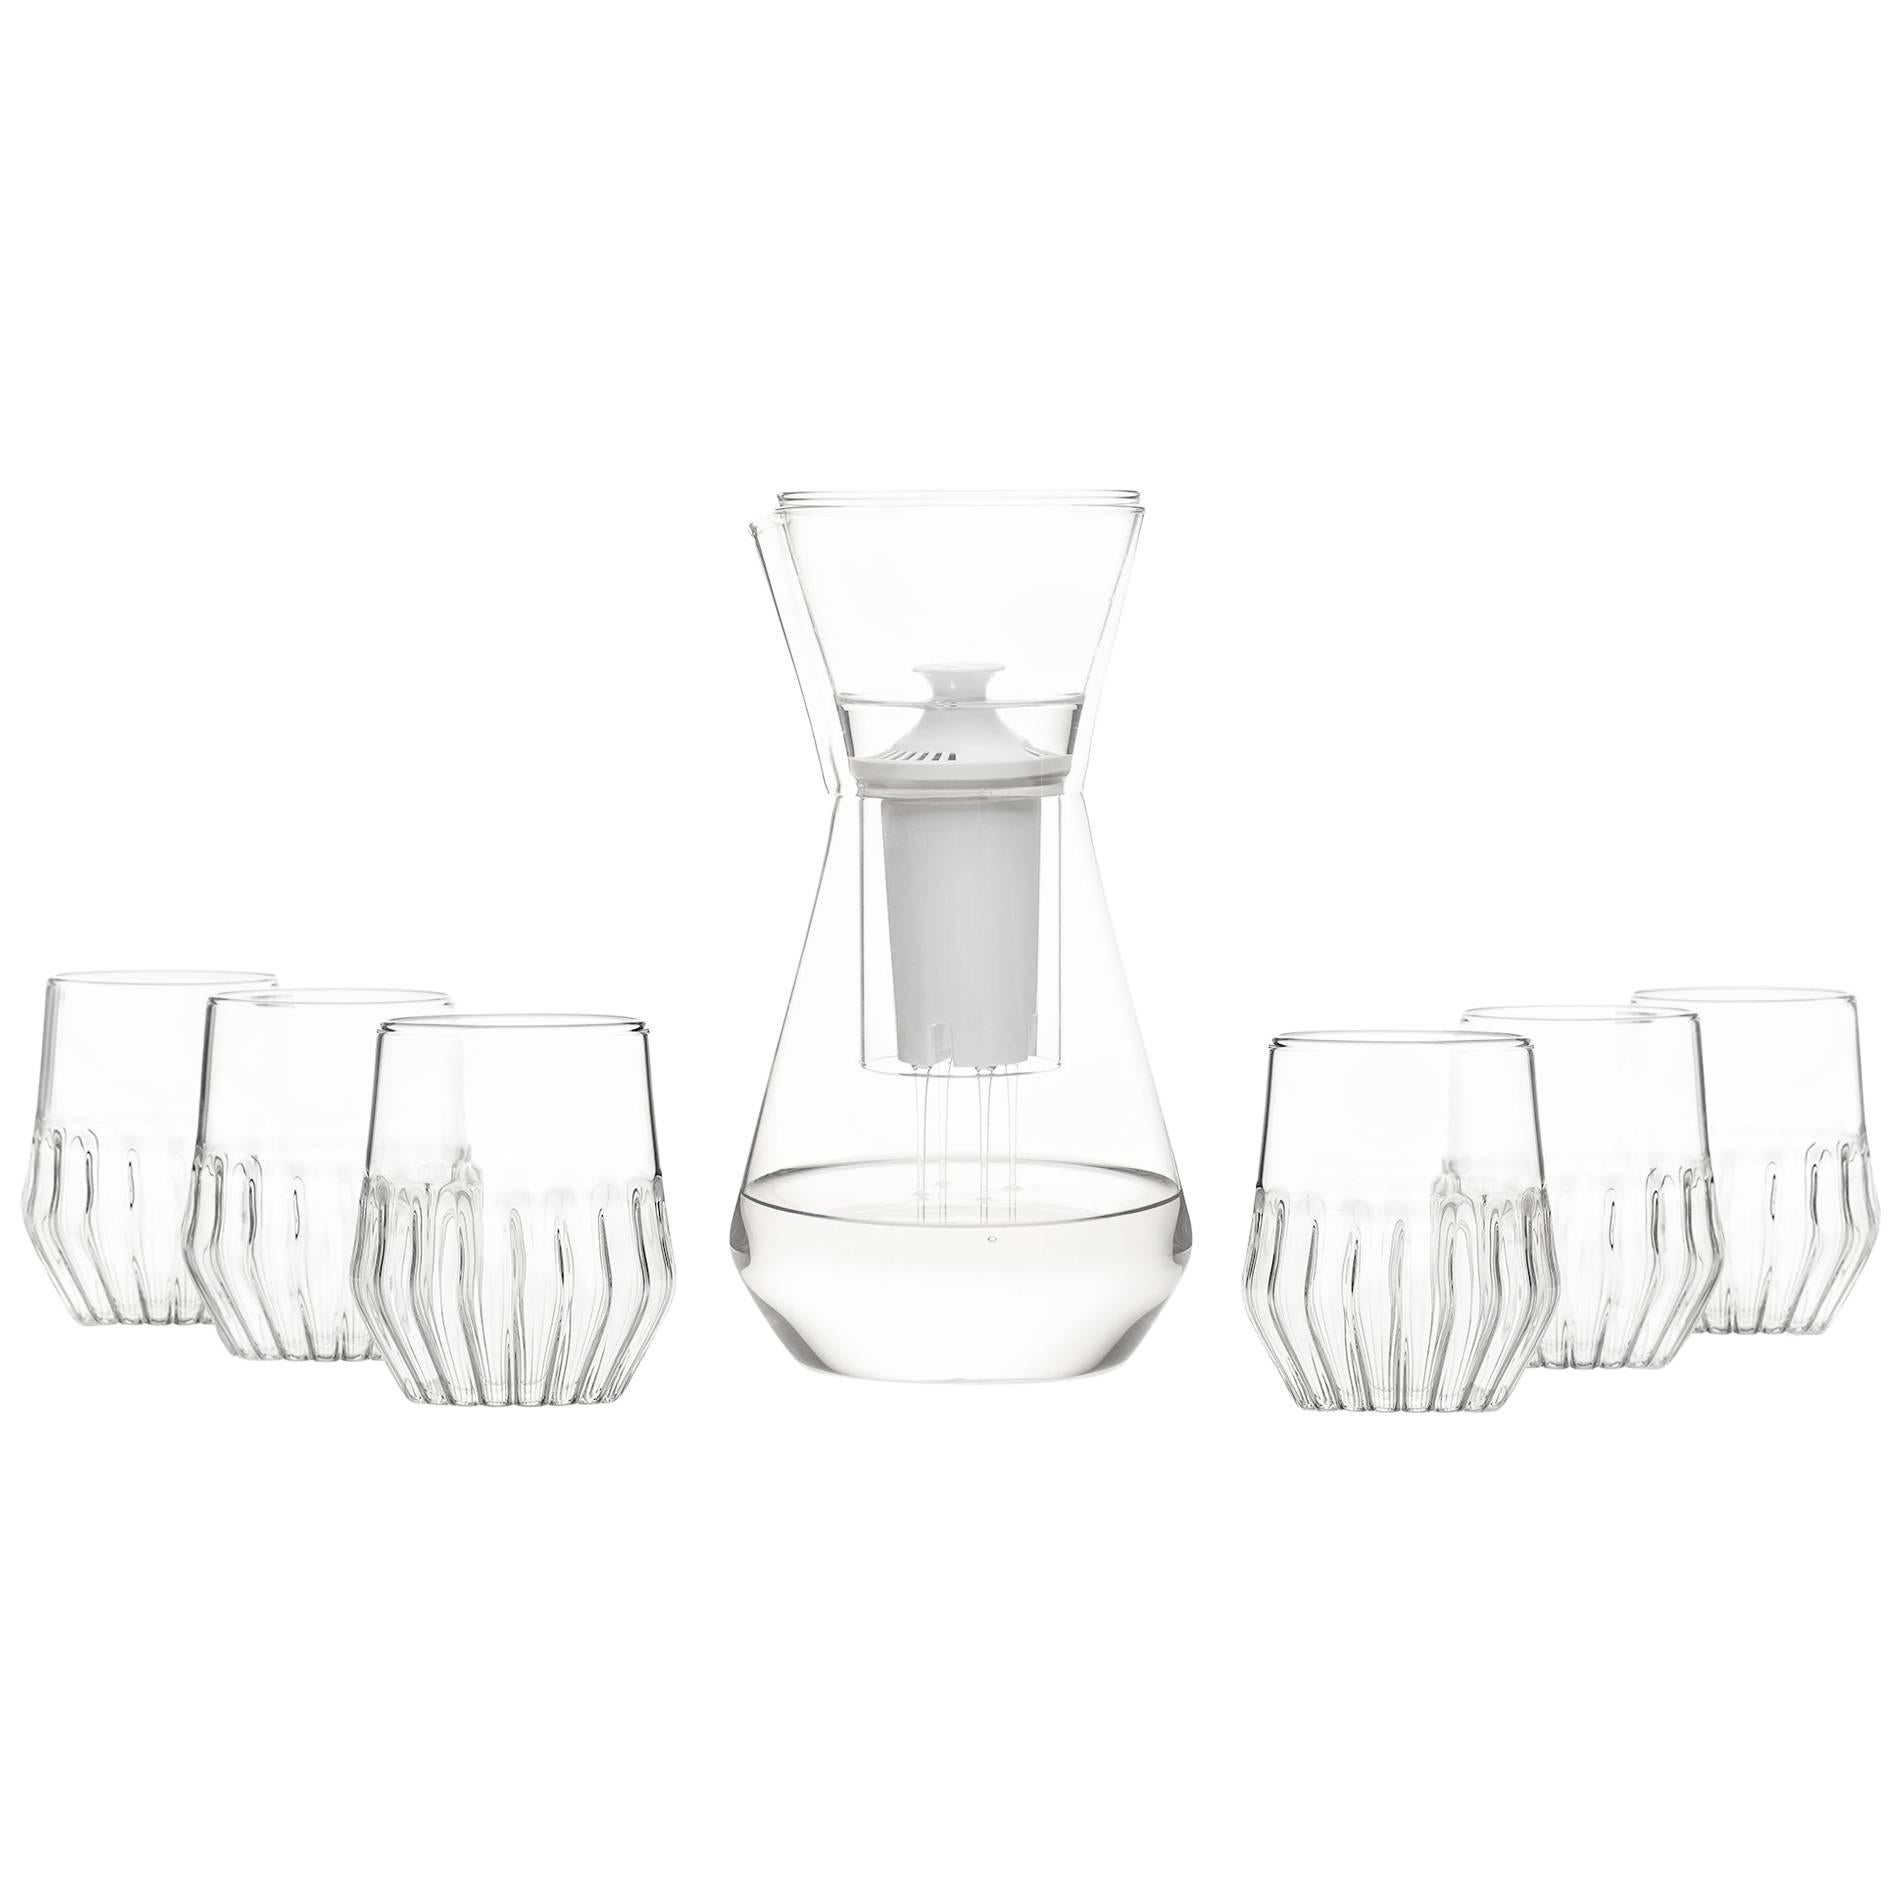 Talise Carafe Pitcher and Six Mixed Small Glasses by fferrone, Czech Republic